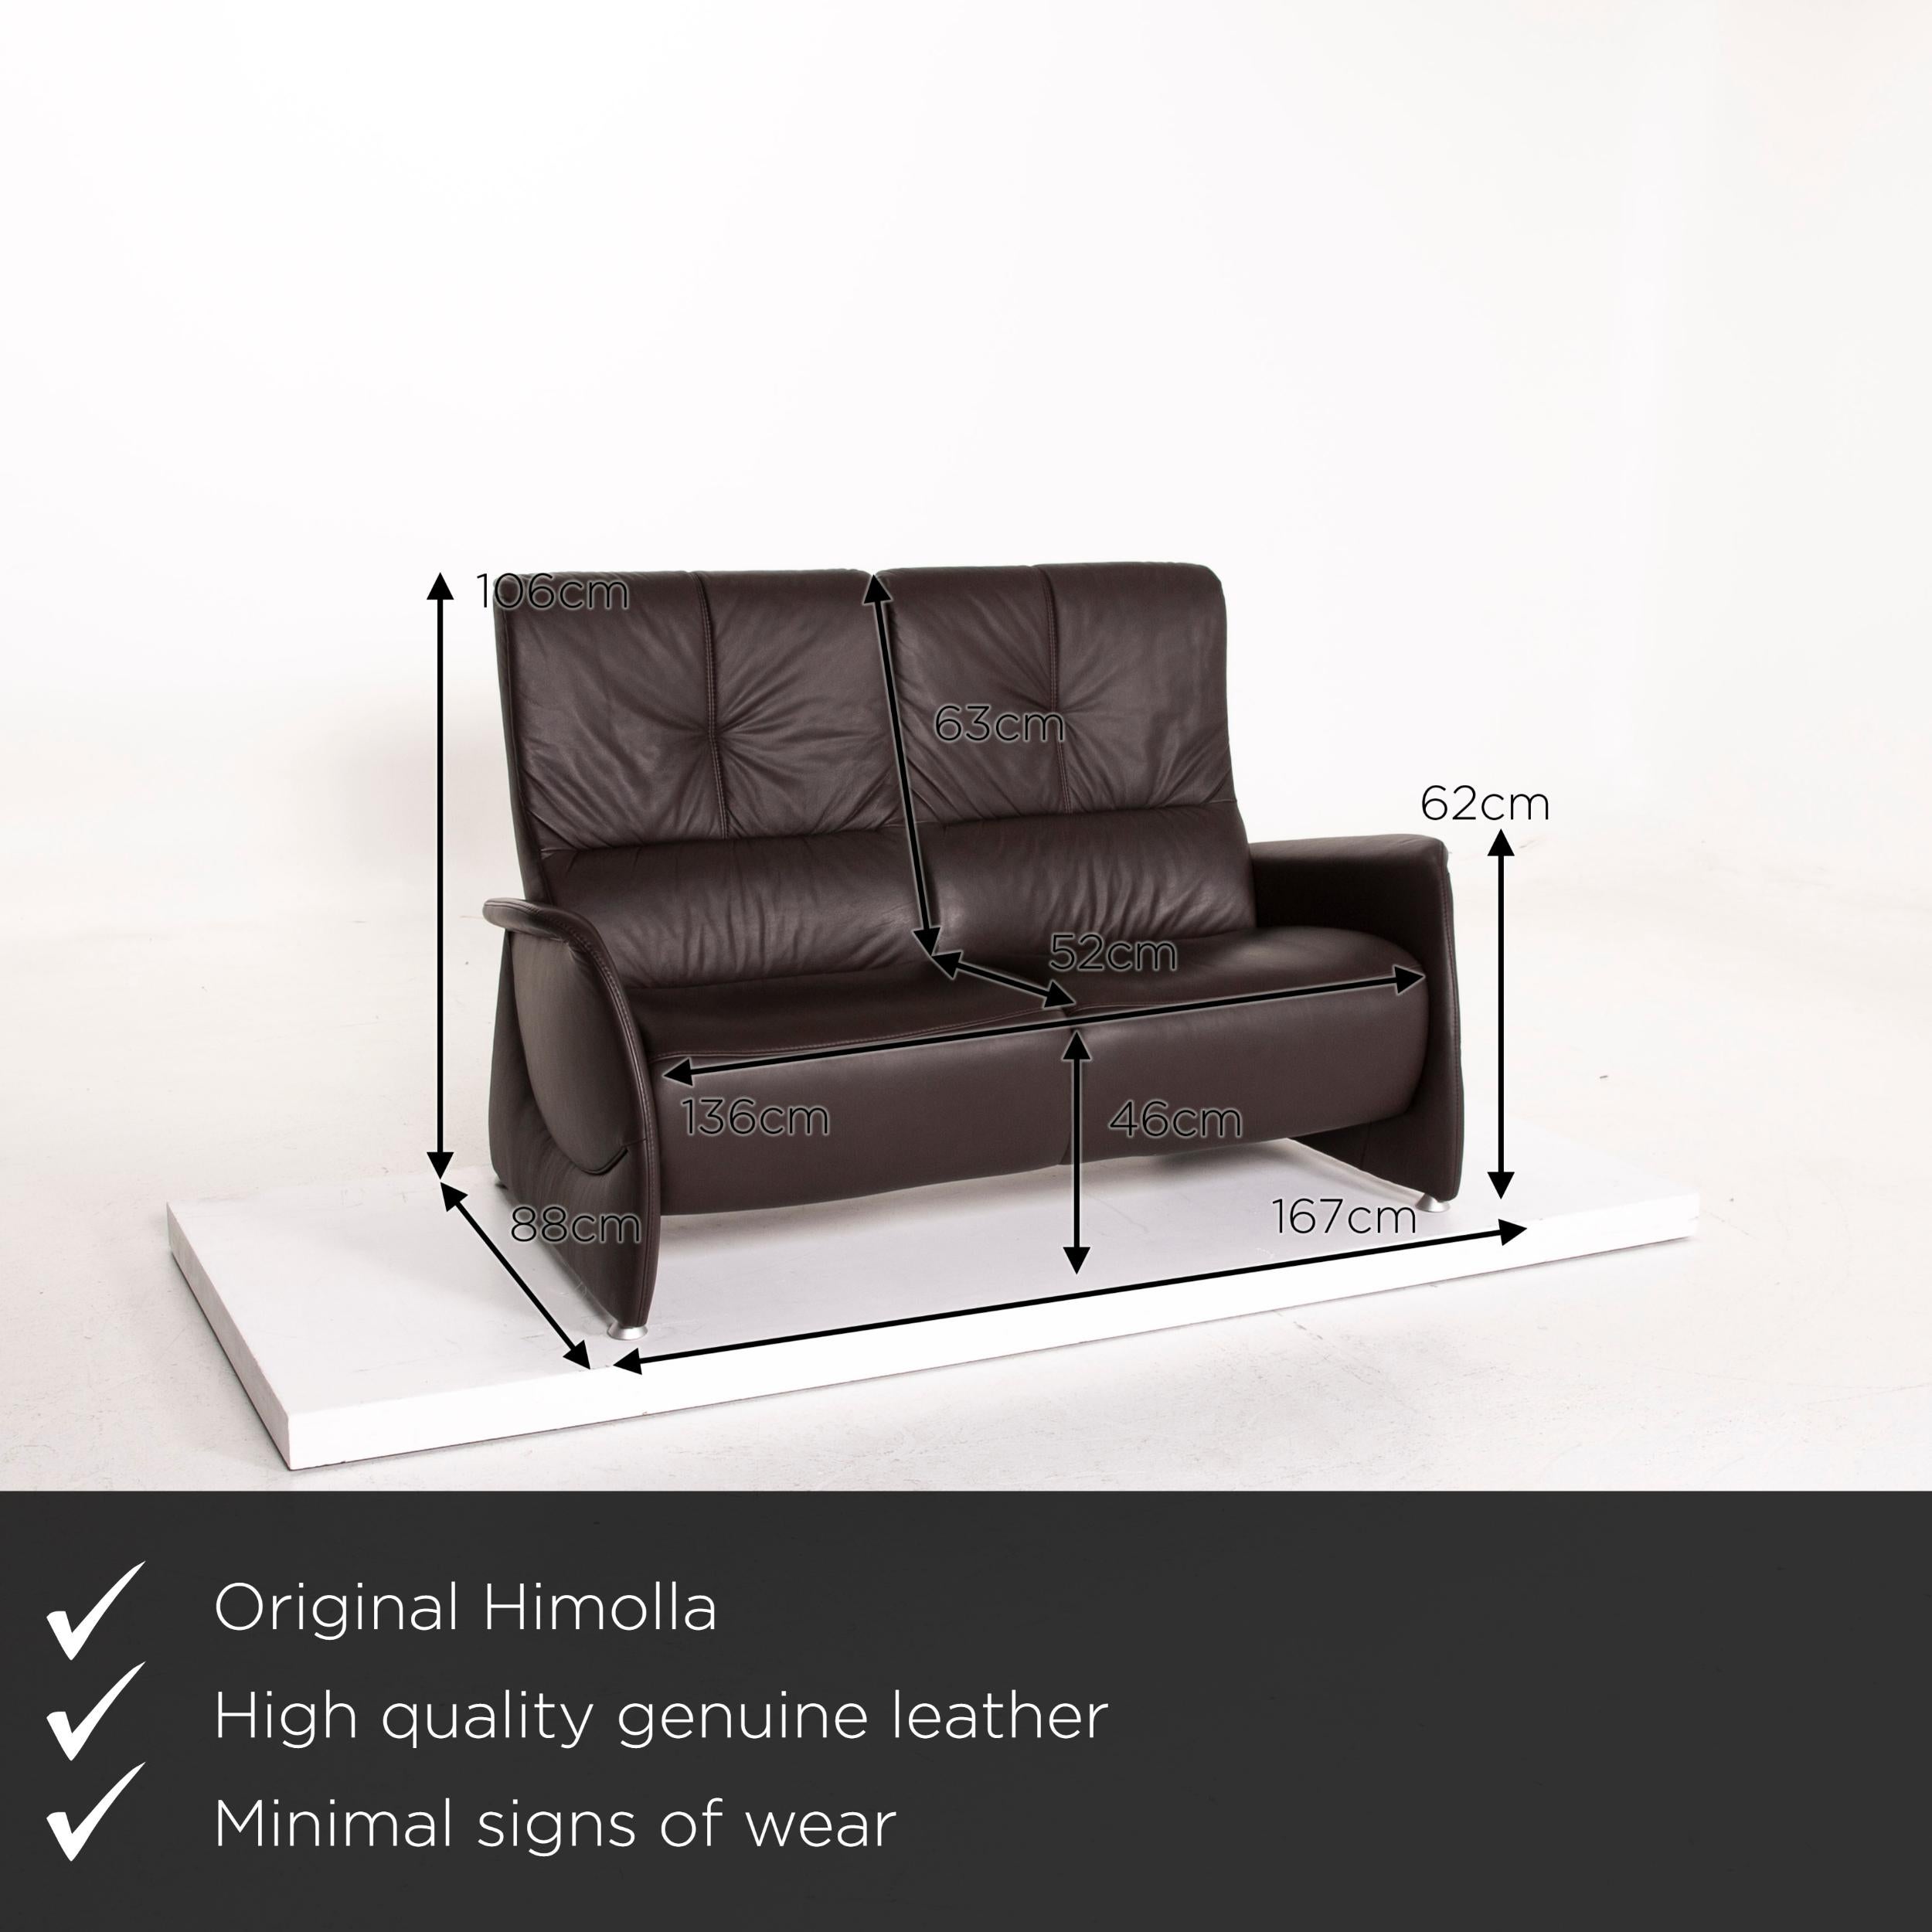 We present to you a Himolla leather sofa brown dark brown two-seat function couch.

 

 Product measurements in centimeters:
 

Depth 88
Width 167
Height 106
Seat height 46
Rest height 62
Seat depth 52
Seat width 136
Back height 63.